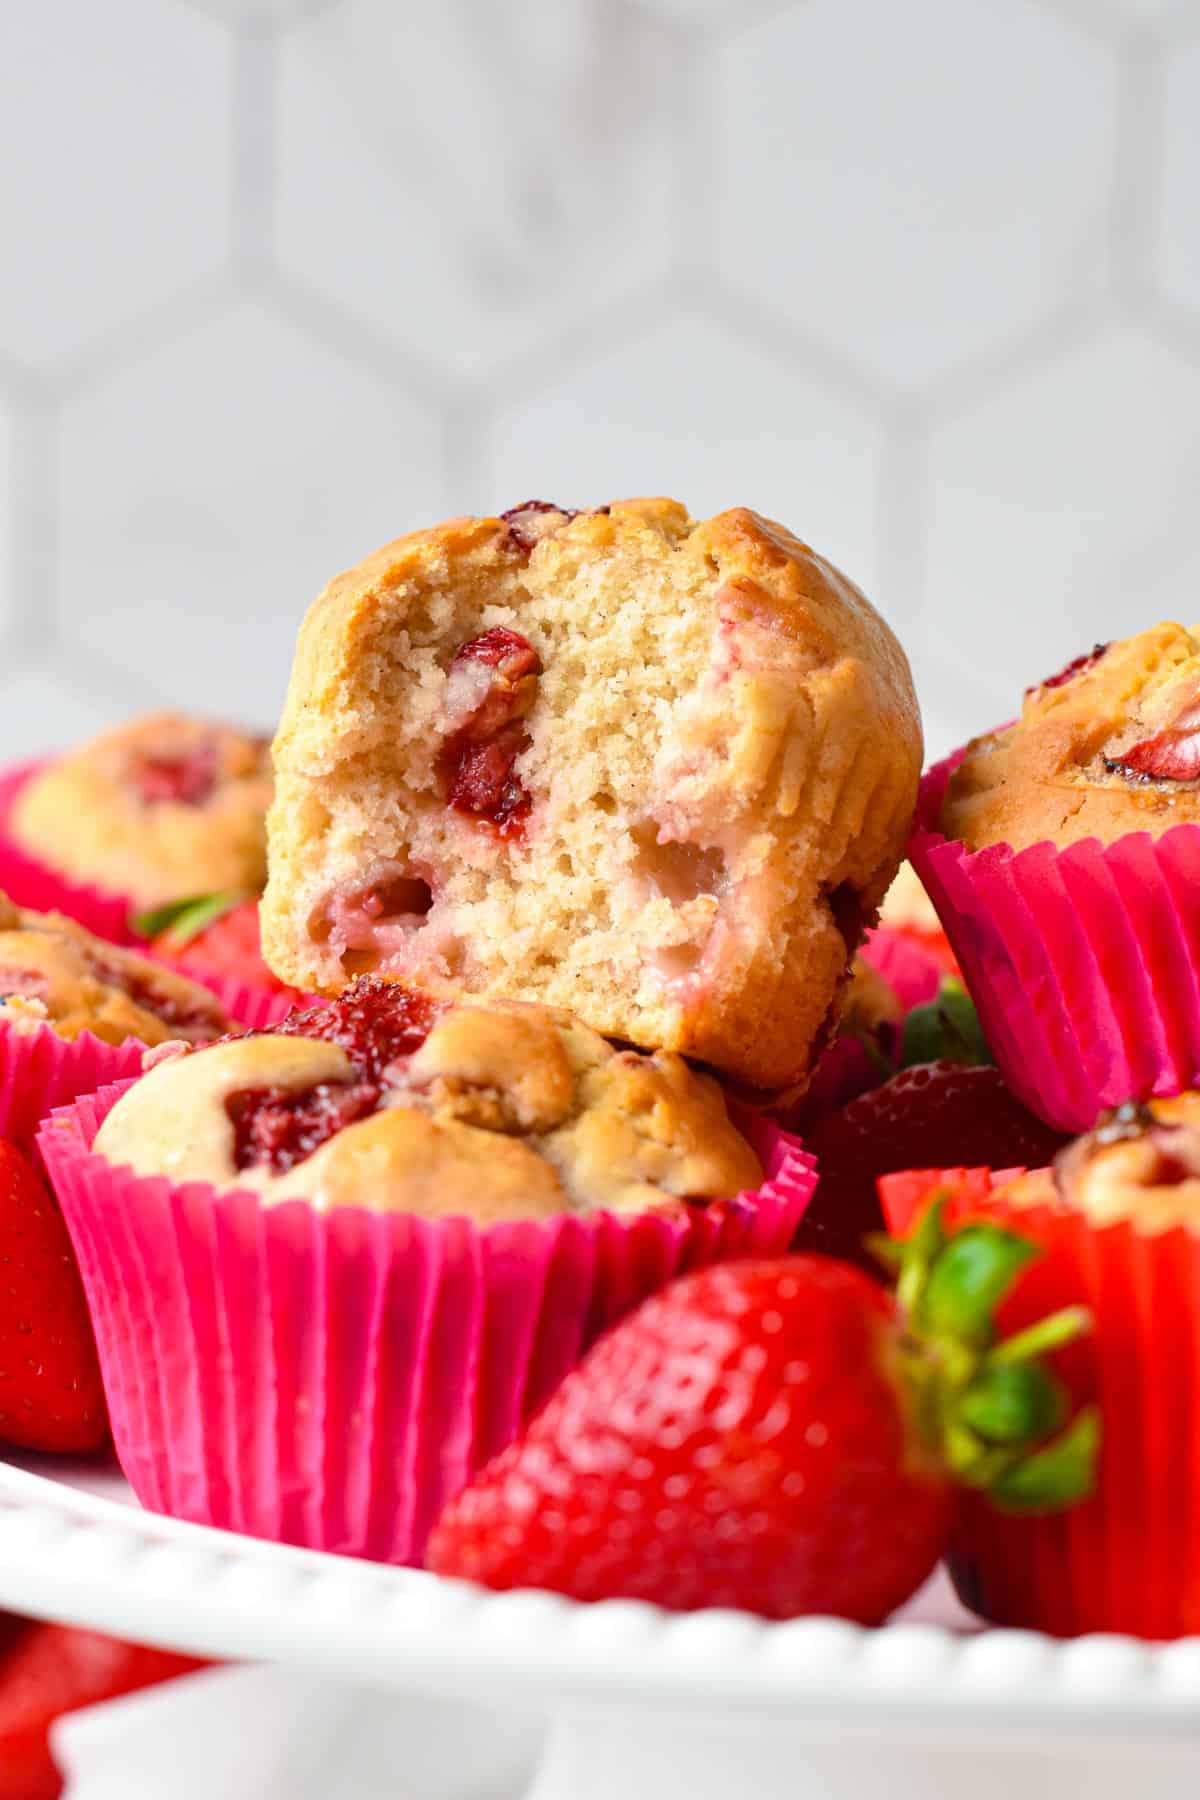 A stack of vegan strawberry muffins with a golden fluffy crumb filled with juicy pieces of baked strawberries and the top one half open, showing it's crumbs.